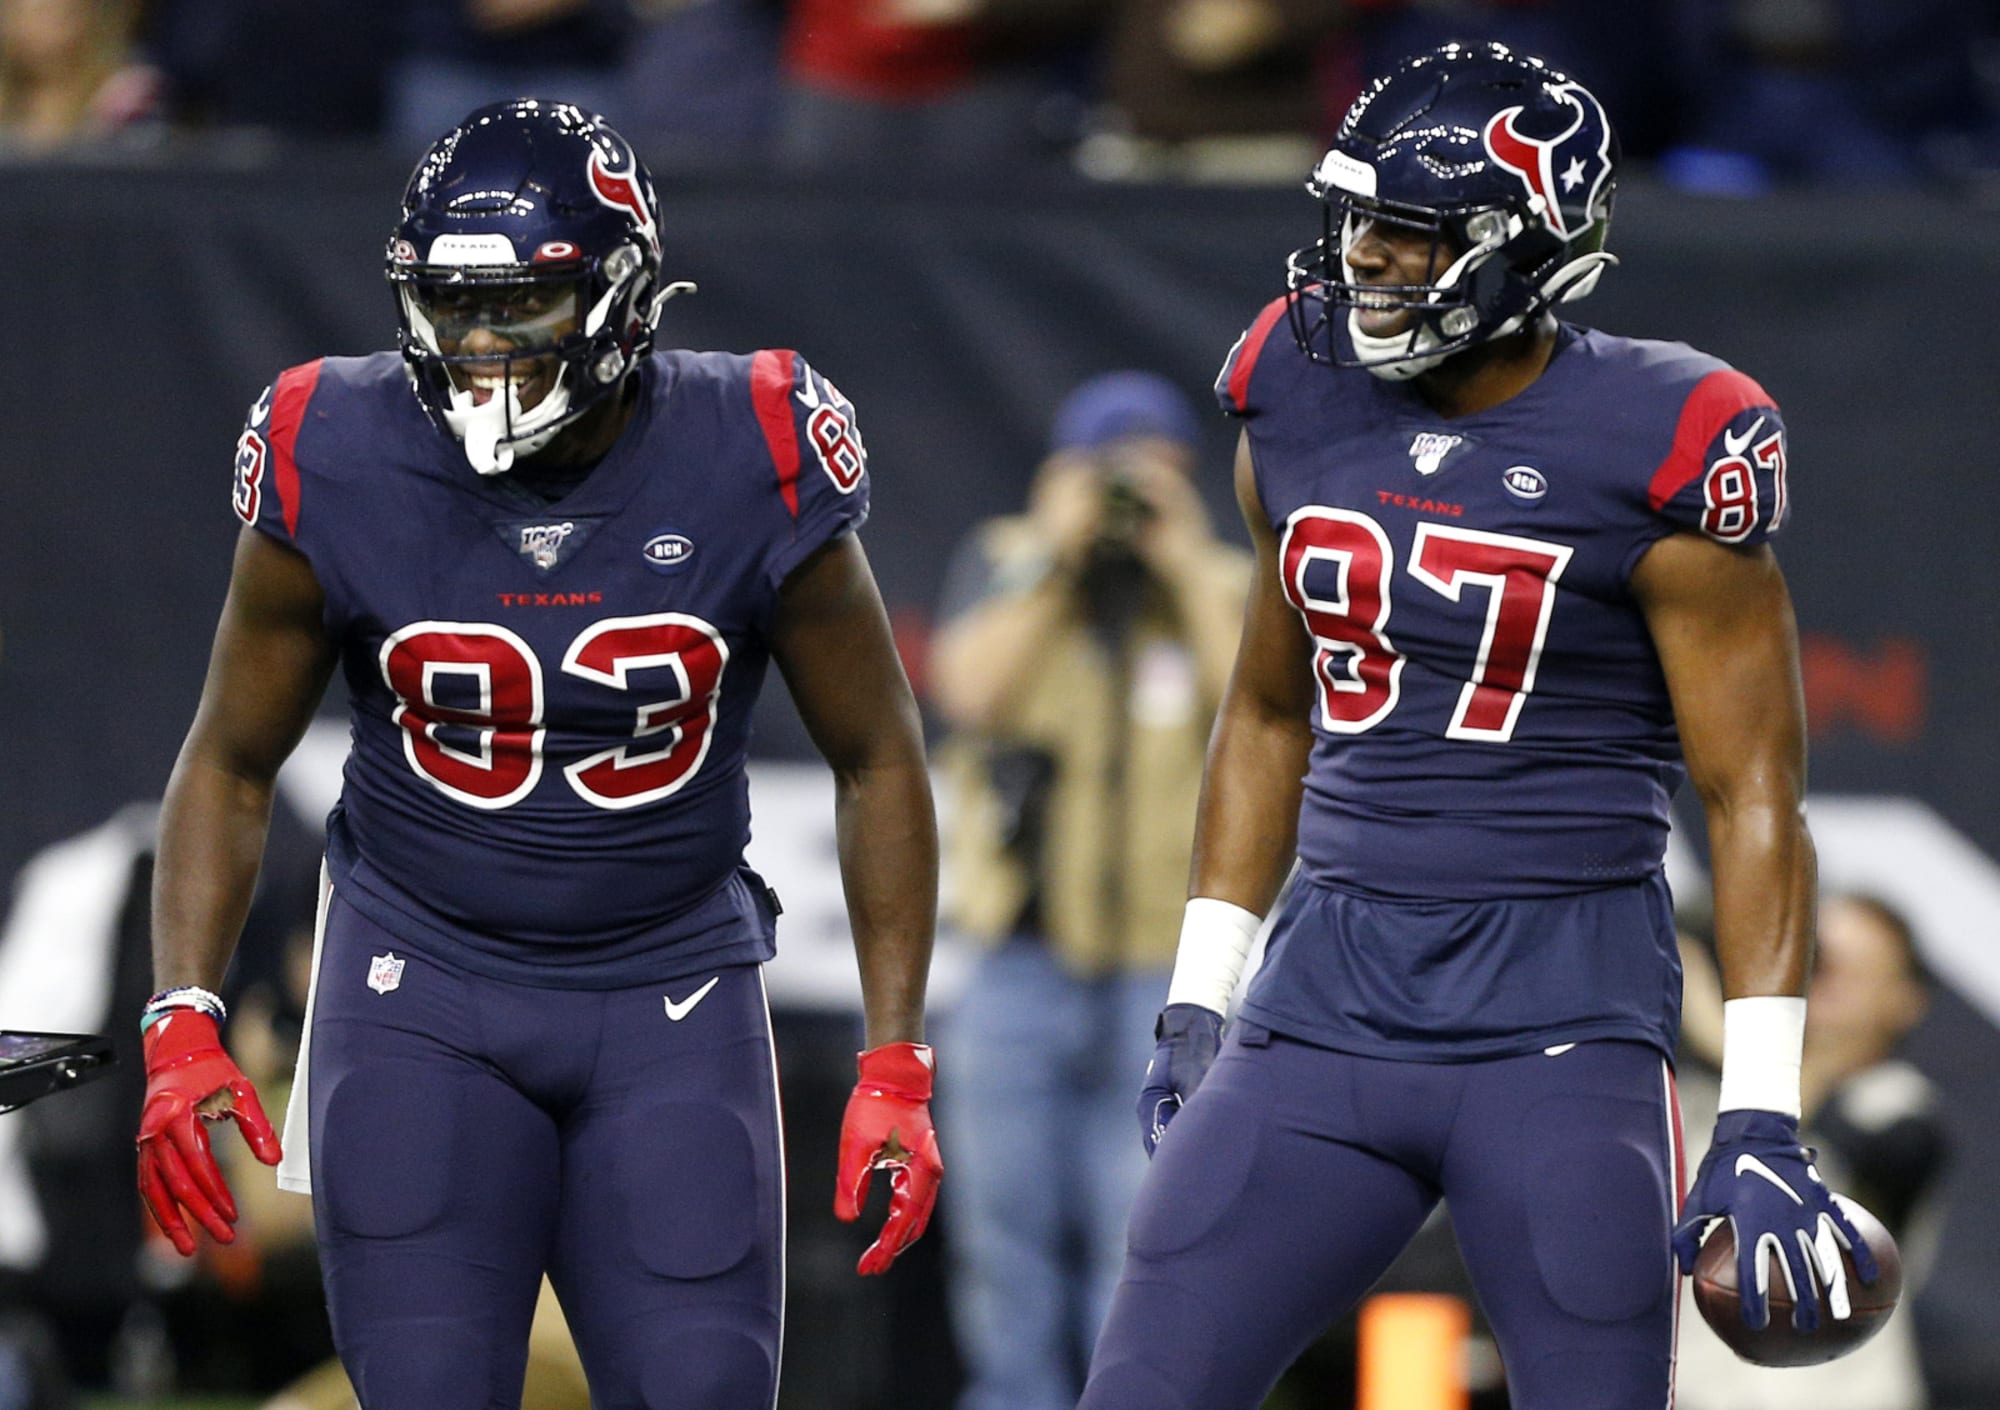 Houston Texans open up intriguing competition at TE for next season